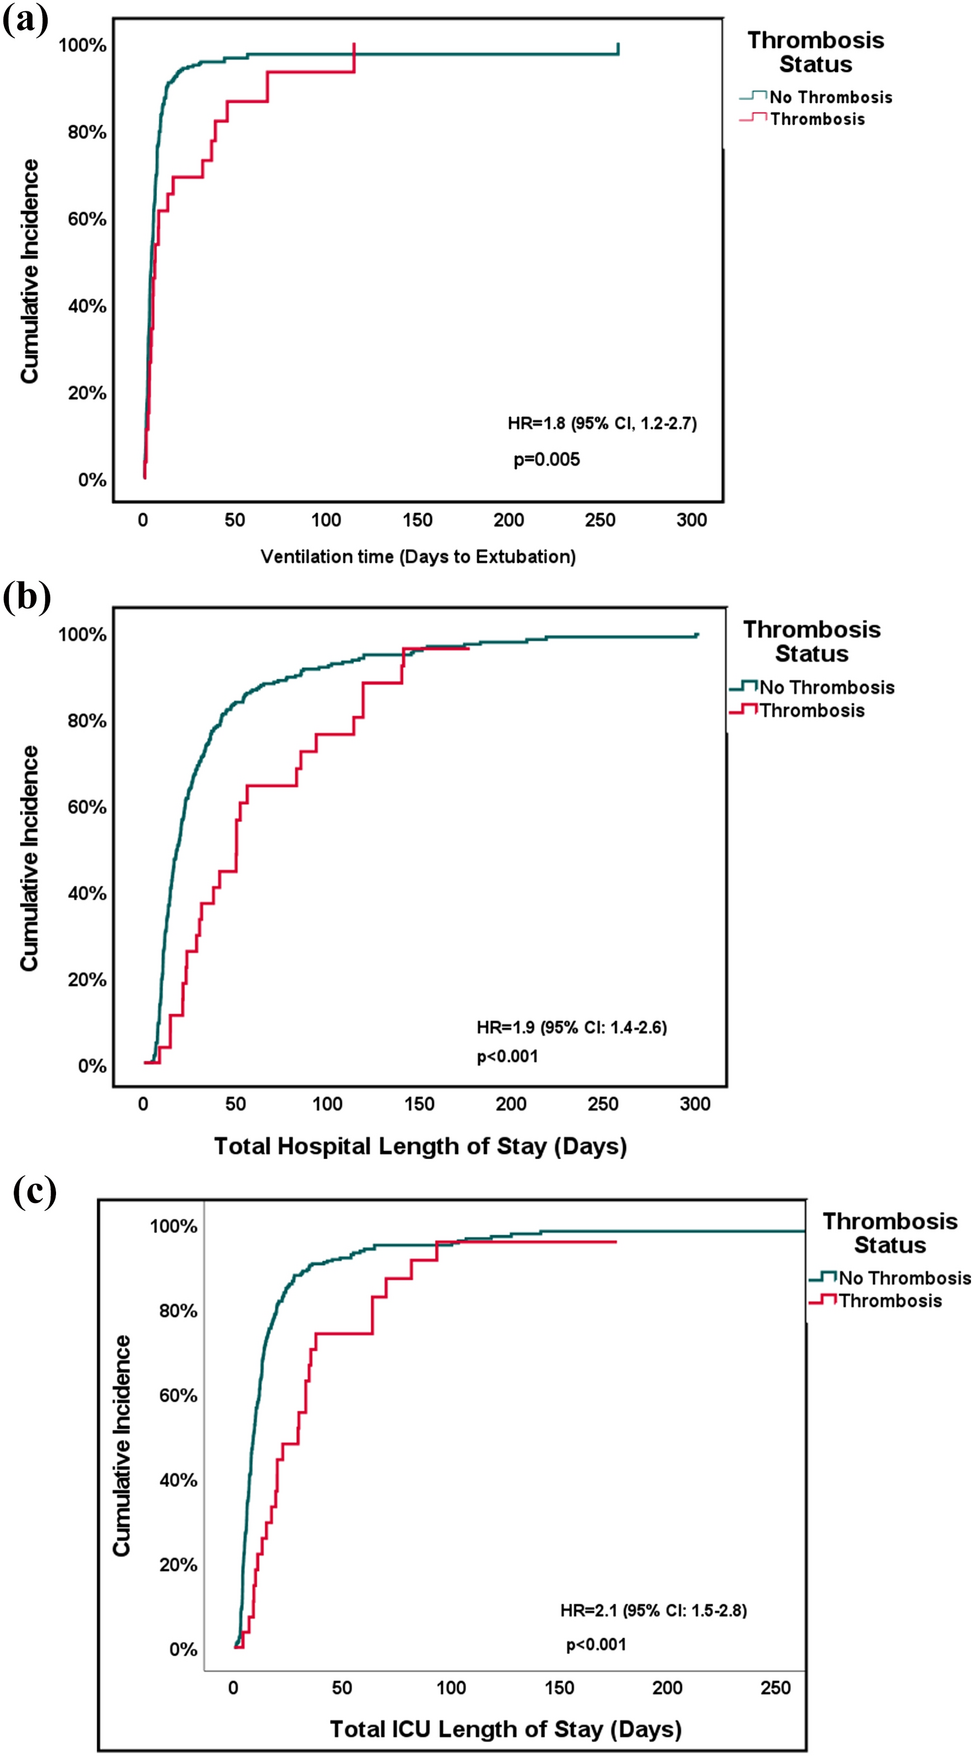 Perioperative Hyper-coagulation and Thrombosis: Cost Analysis After Congenital Heart Surgery